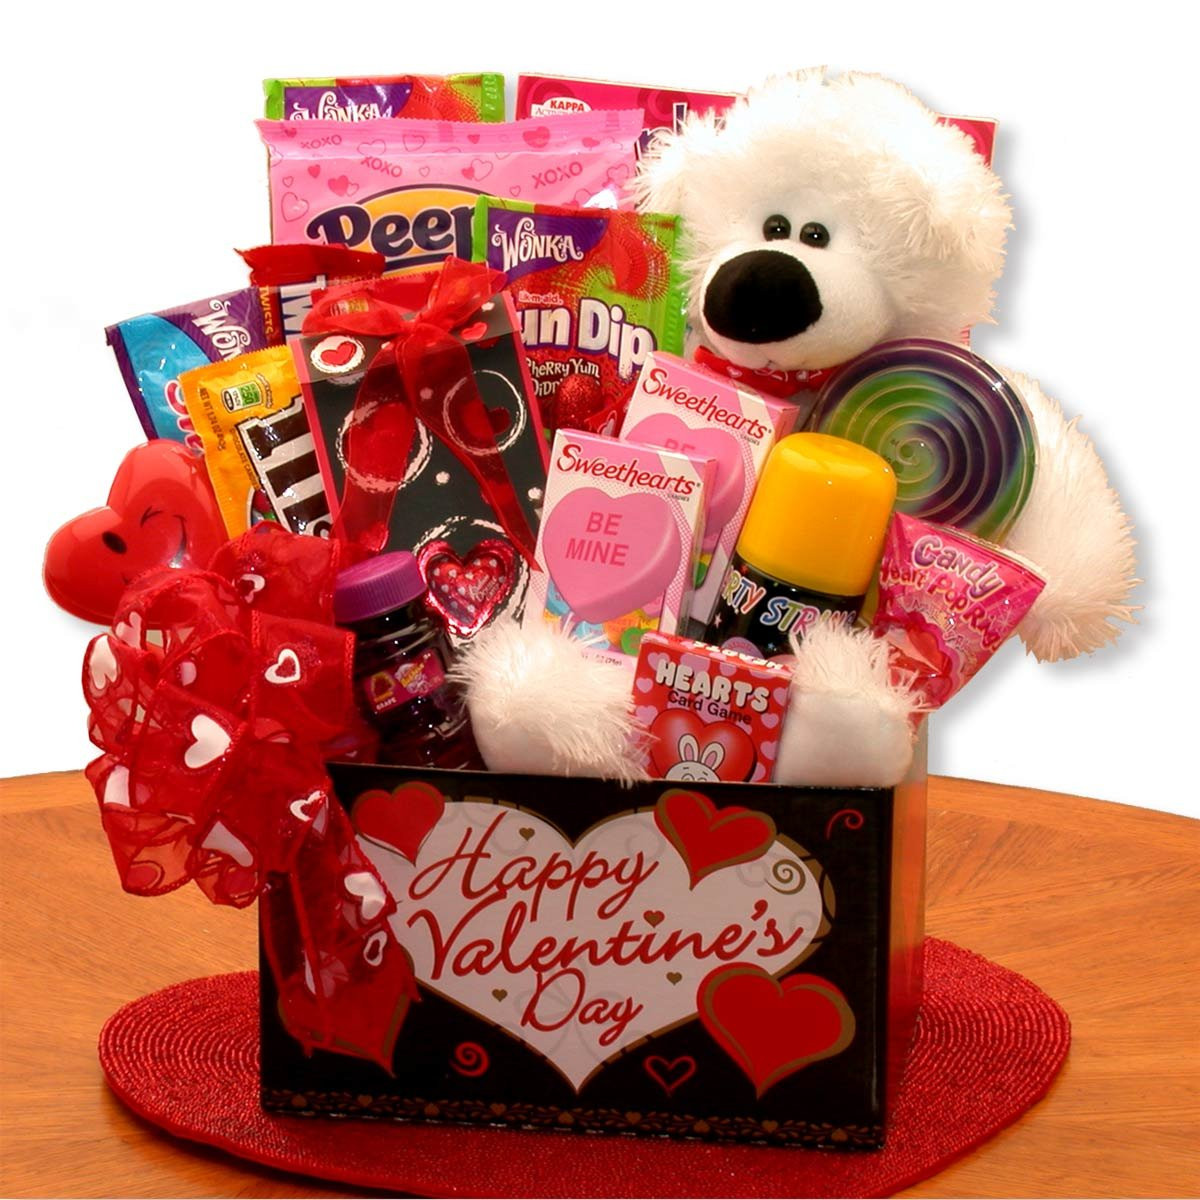 Cute Valentine Gift Ideas For Her
 Cute His & Her Valentine Gift Ideas For Your Loved es